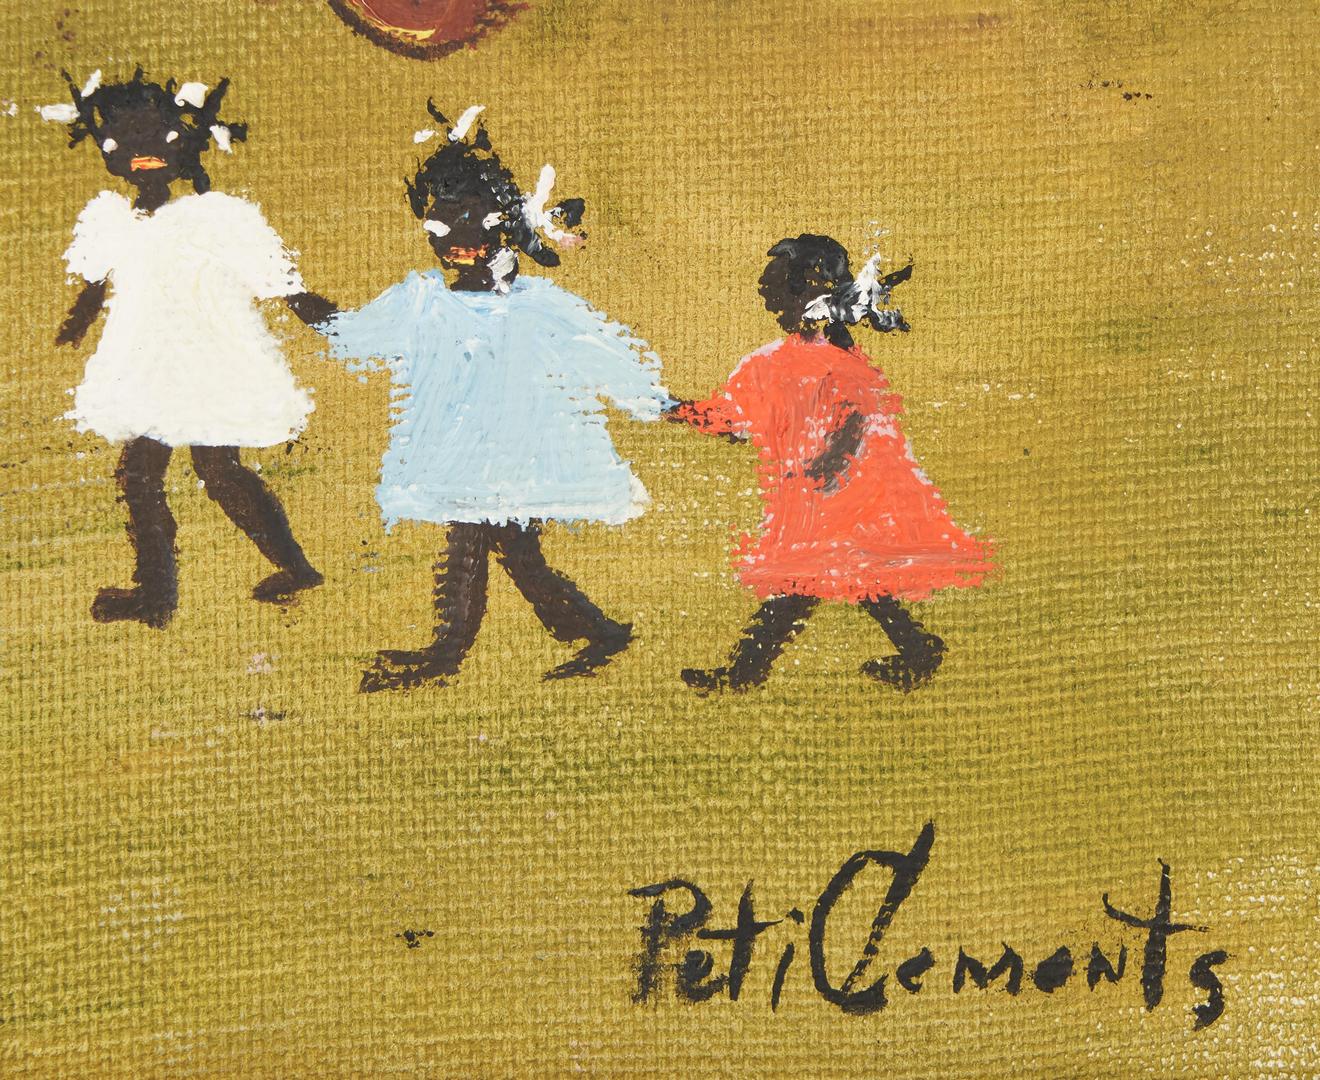 Lot 215: 2 Peti Clements Acrylic Paintings, Going Home I and II